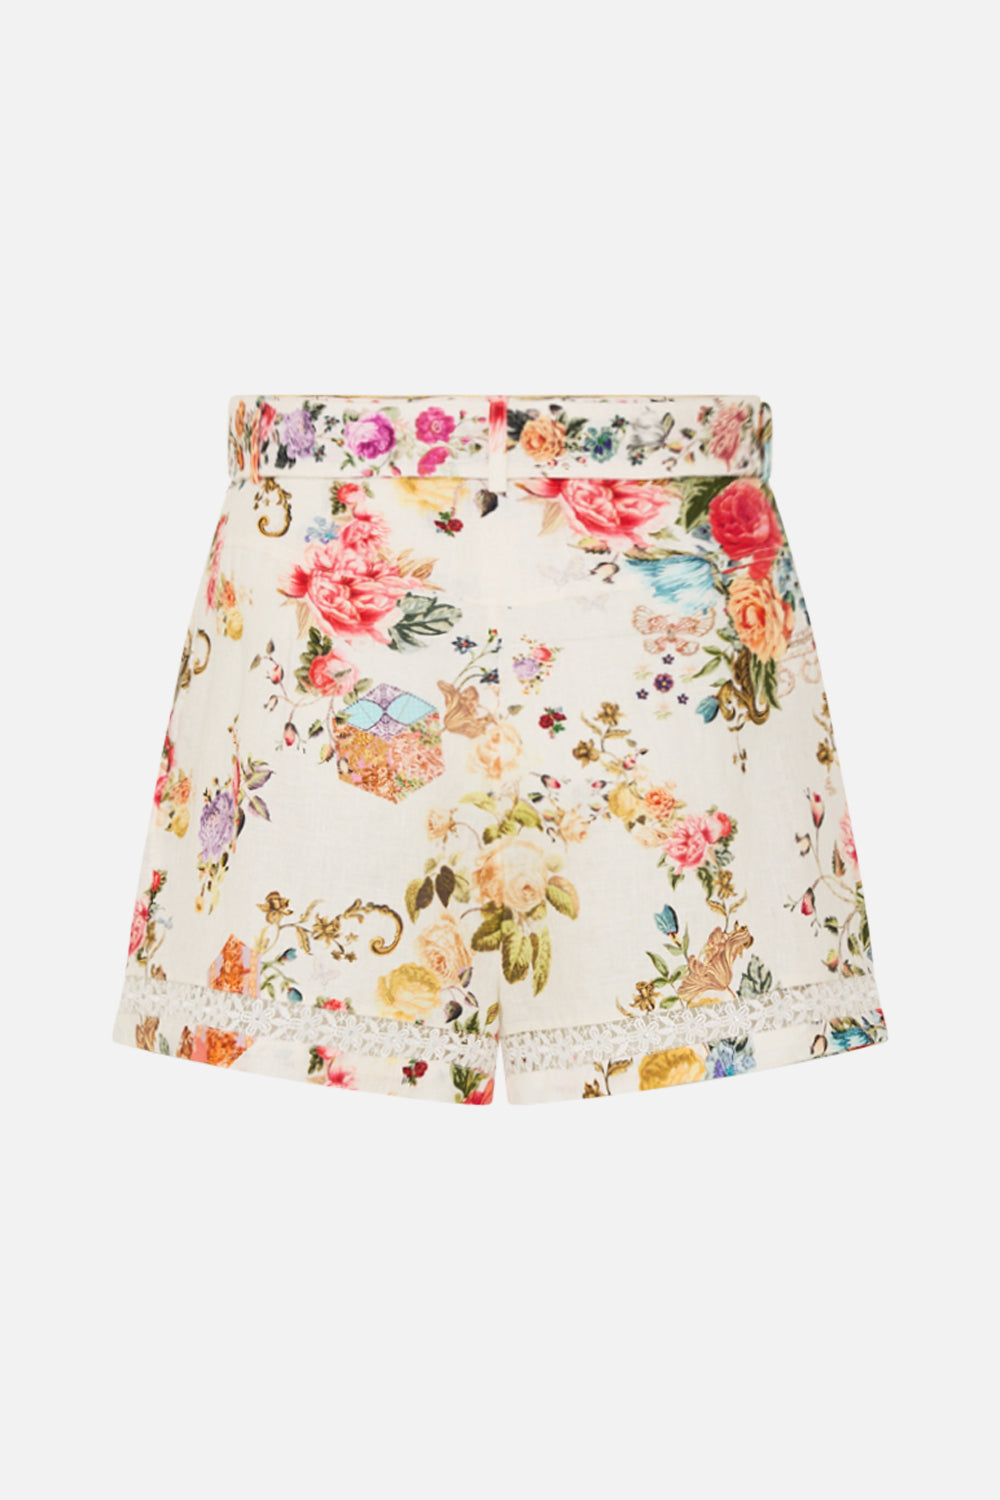 CAMILLA floral high-waisted shorts with lace insert in Sew Yesterday